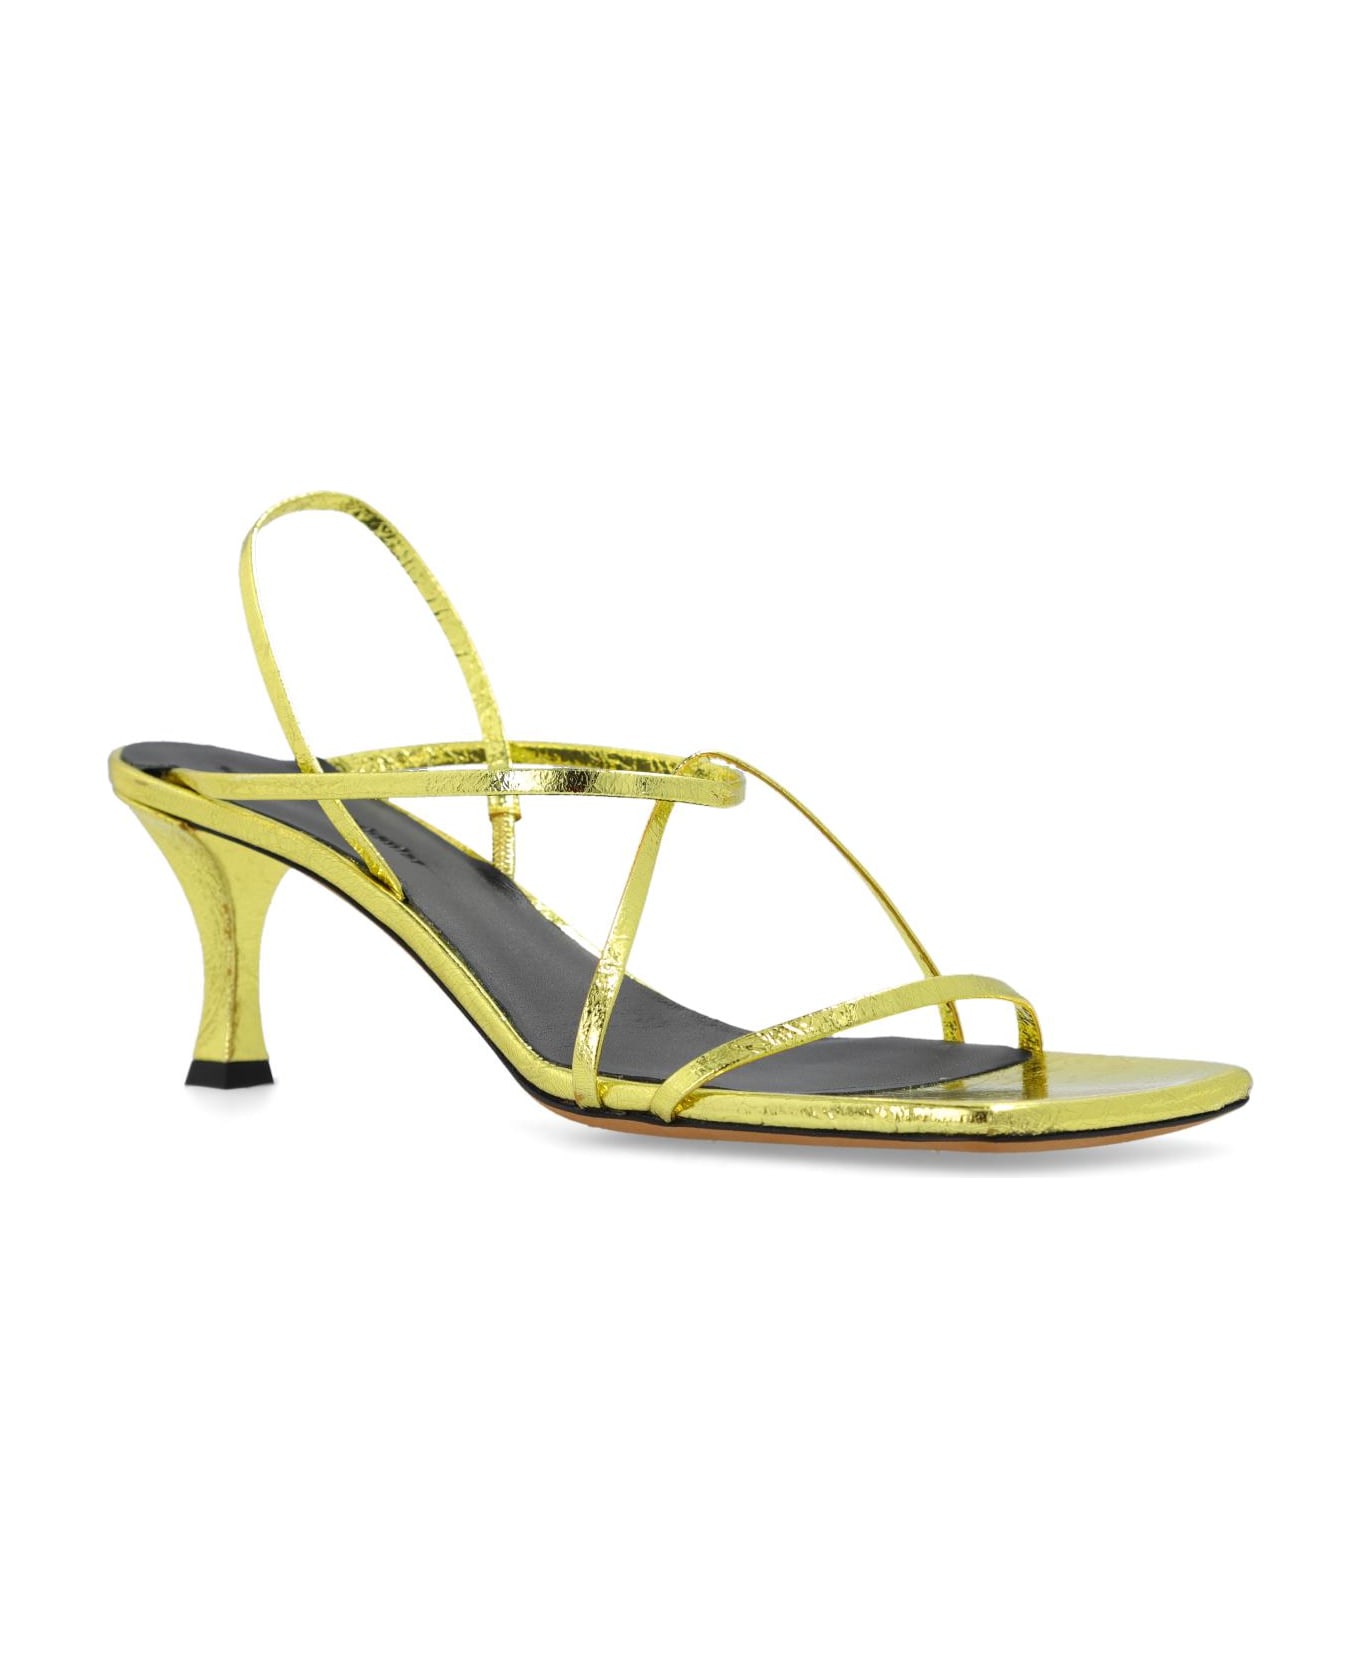 Proenza Schouler 'square Strappy' Heeled Sandals - Gold サンダル